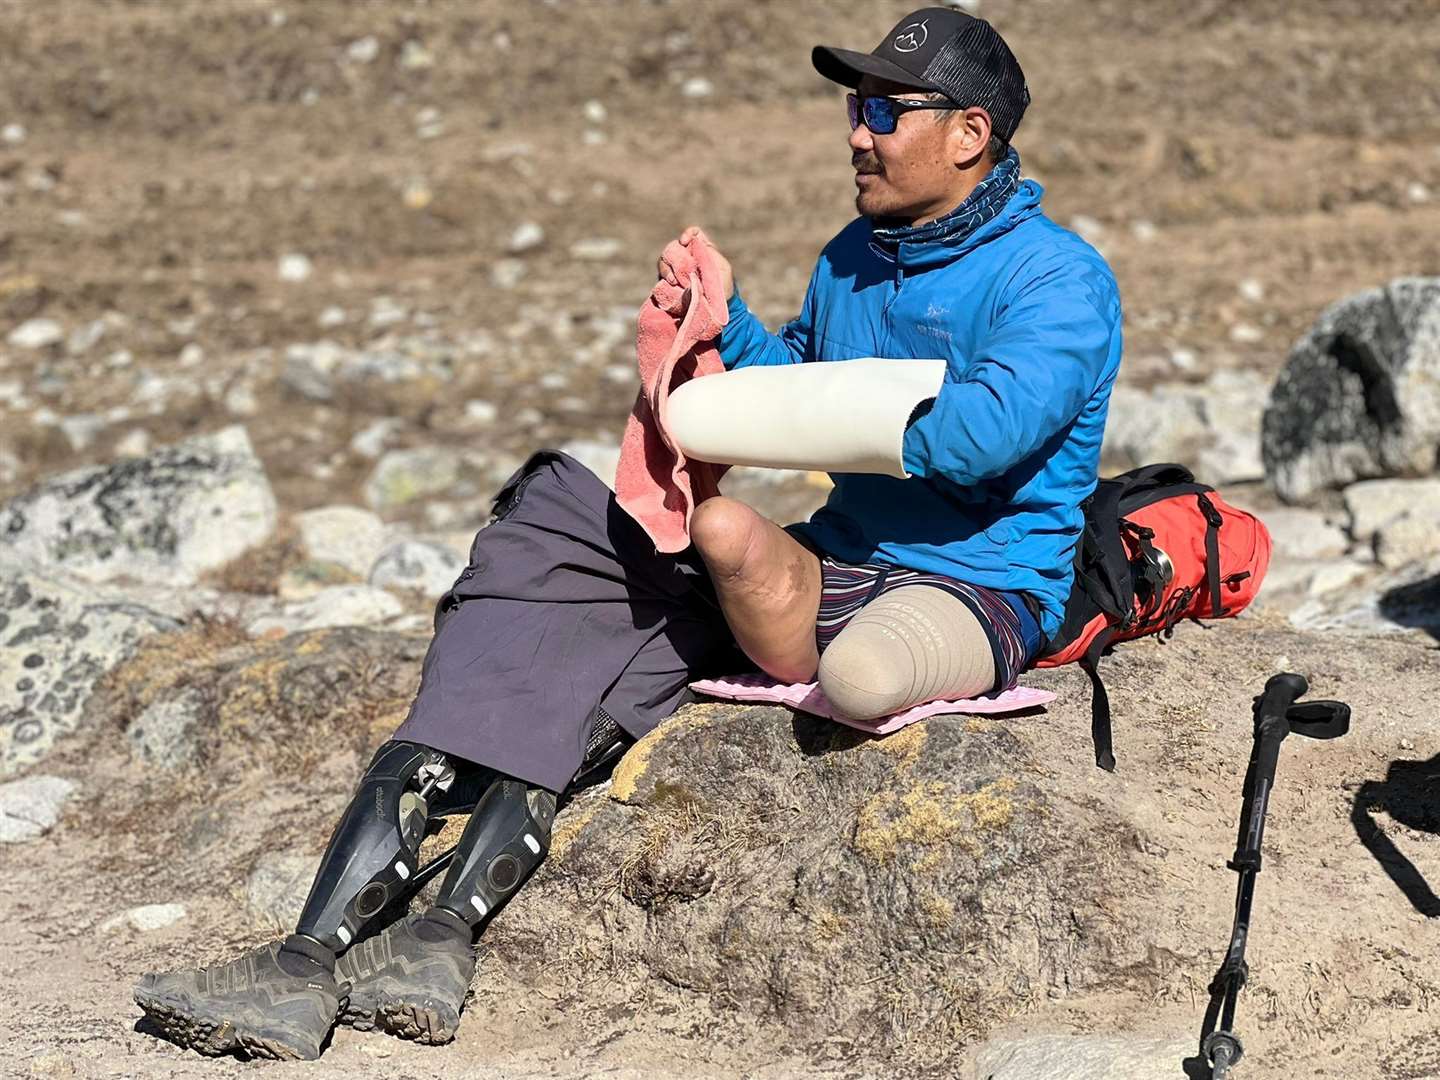 A blast from a improvised explosive device in 2010 caused Magar, who lives in Canterbury, to lose both of his legs in 2010. Photo: HST Adventures